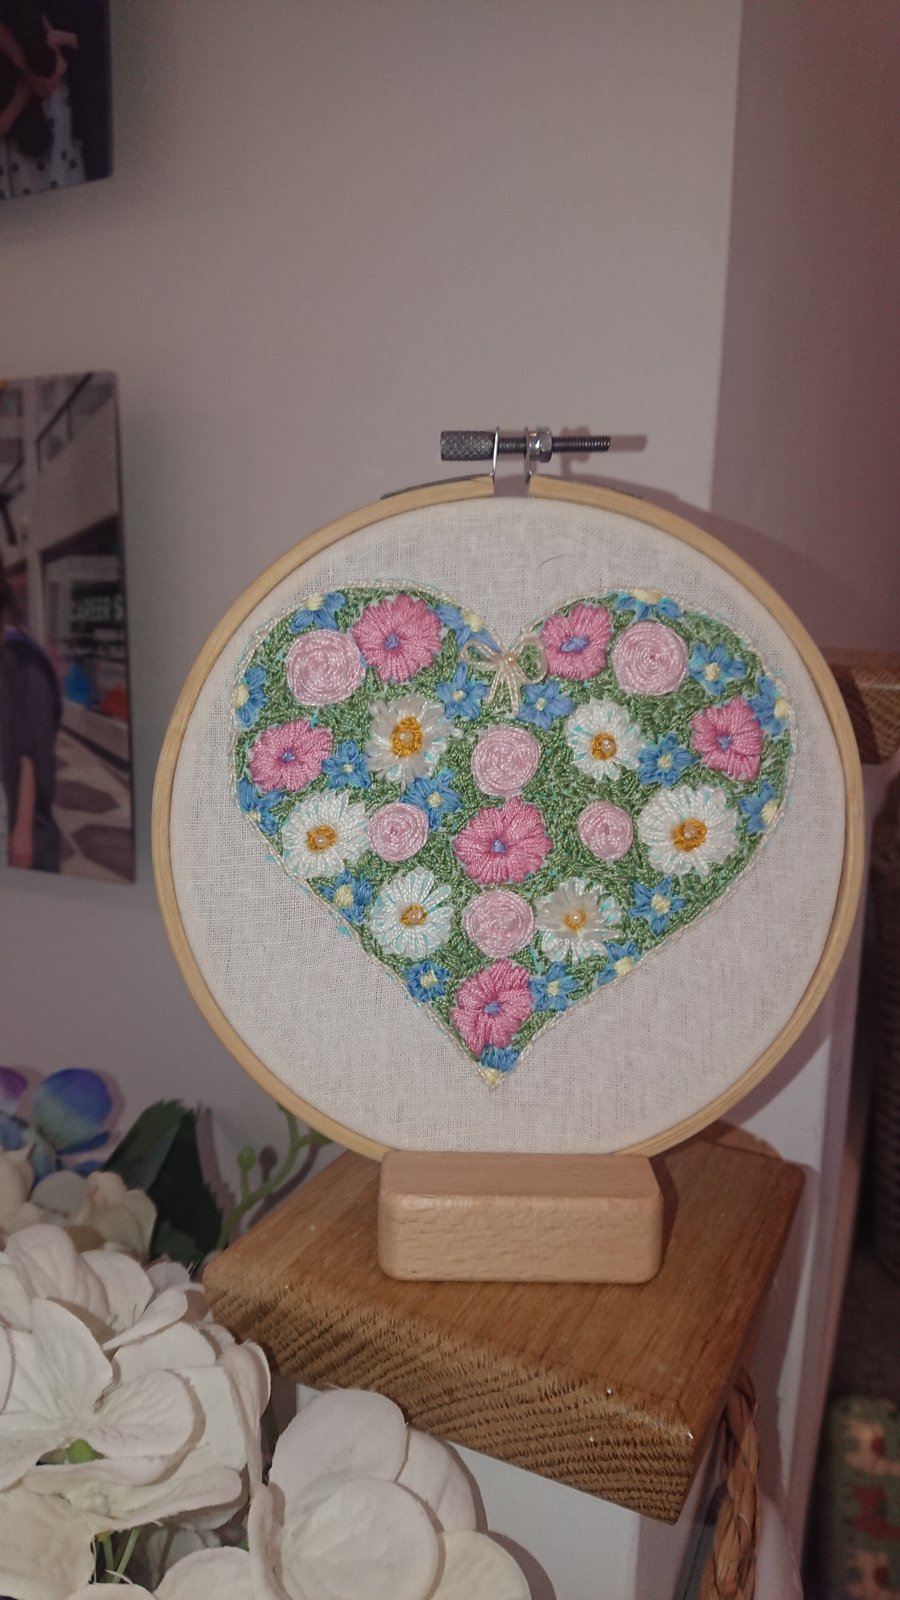 Floral Heart Embroidery Picture, Wall Decoration, Cottagecore 